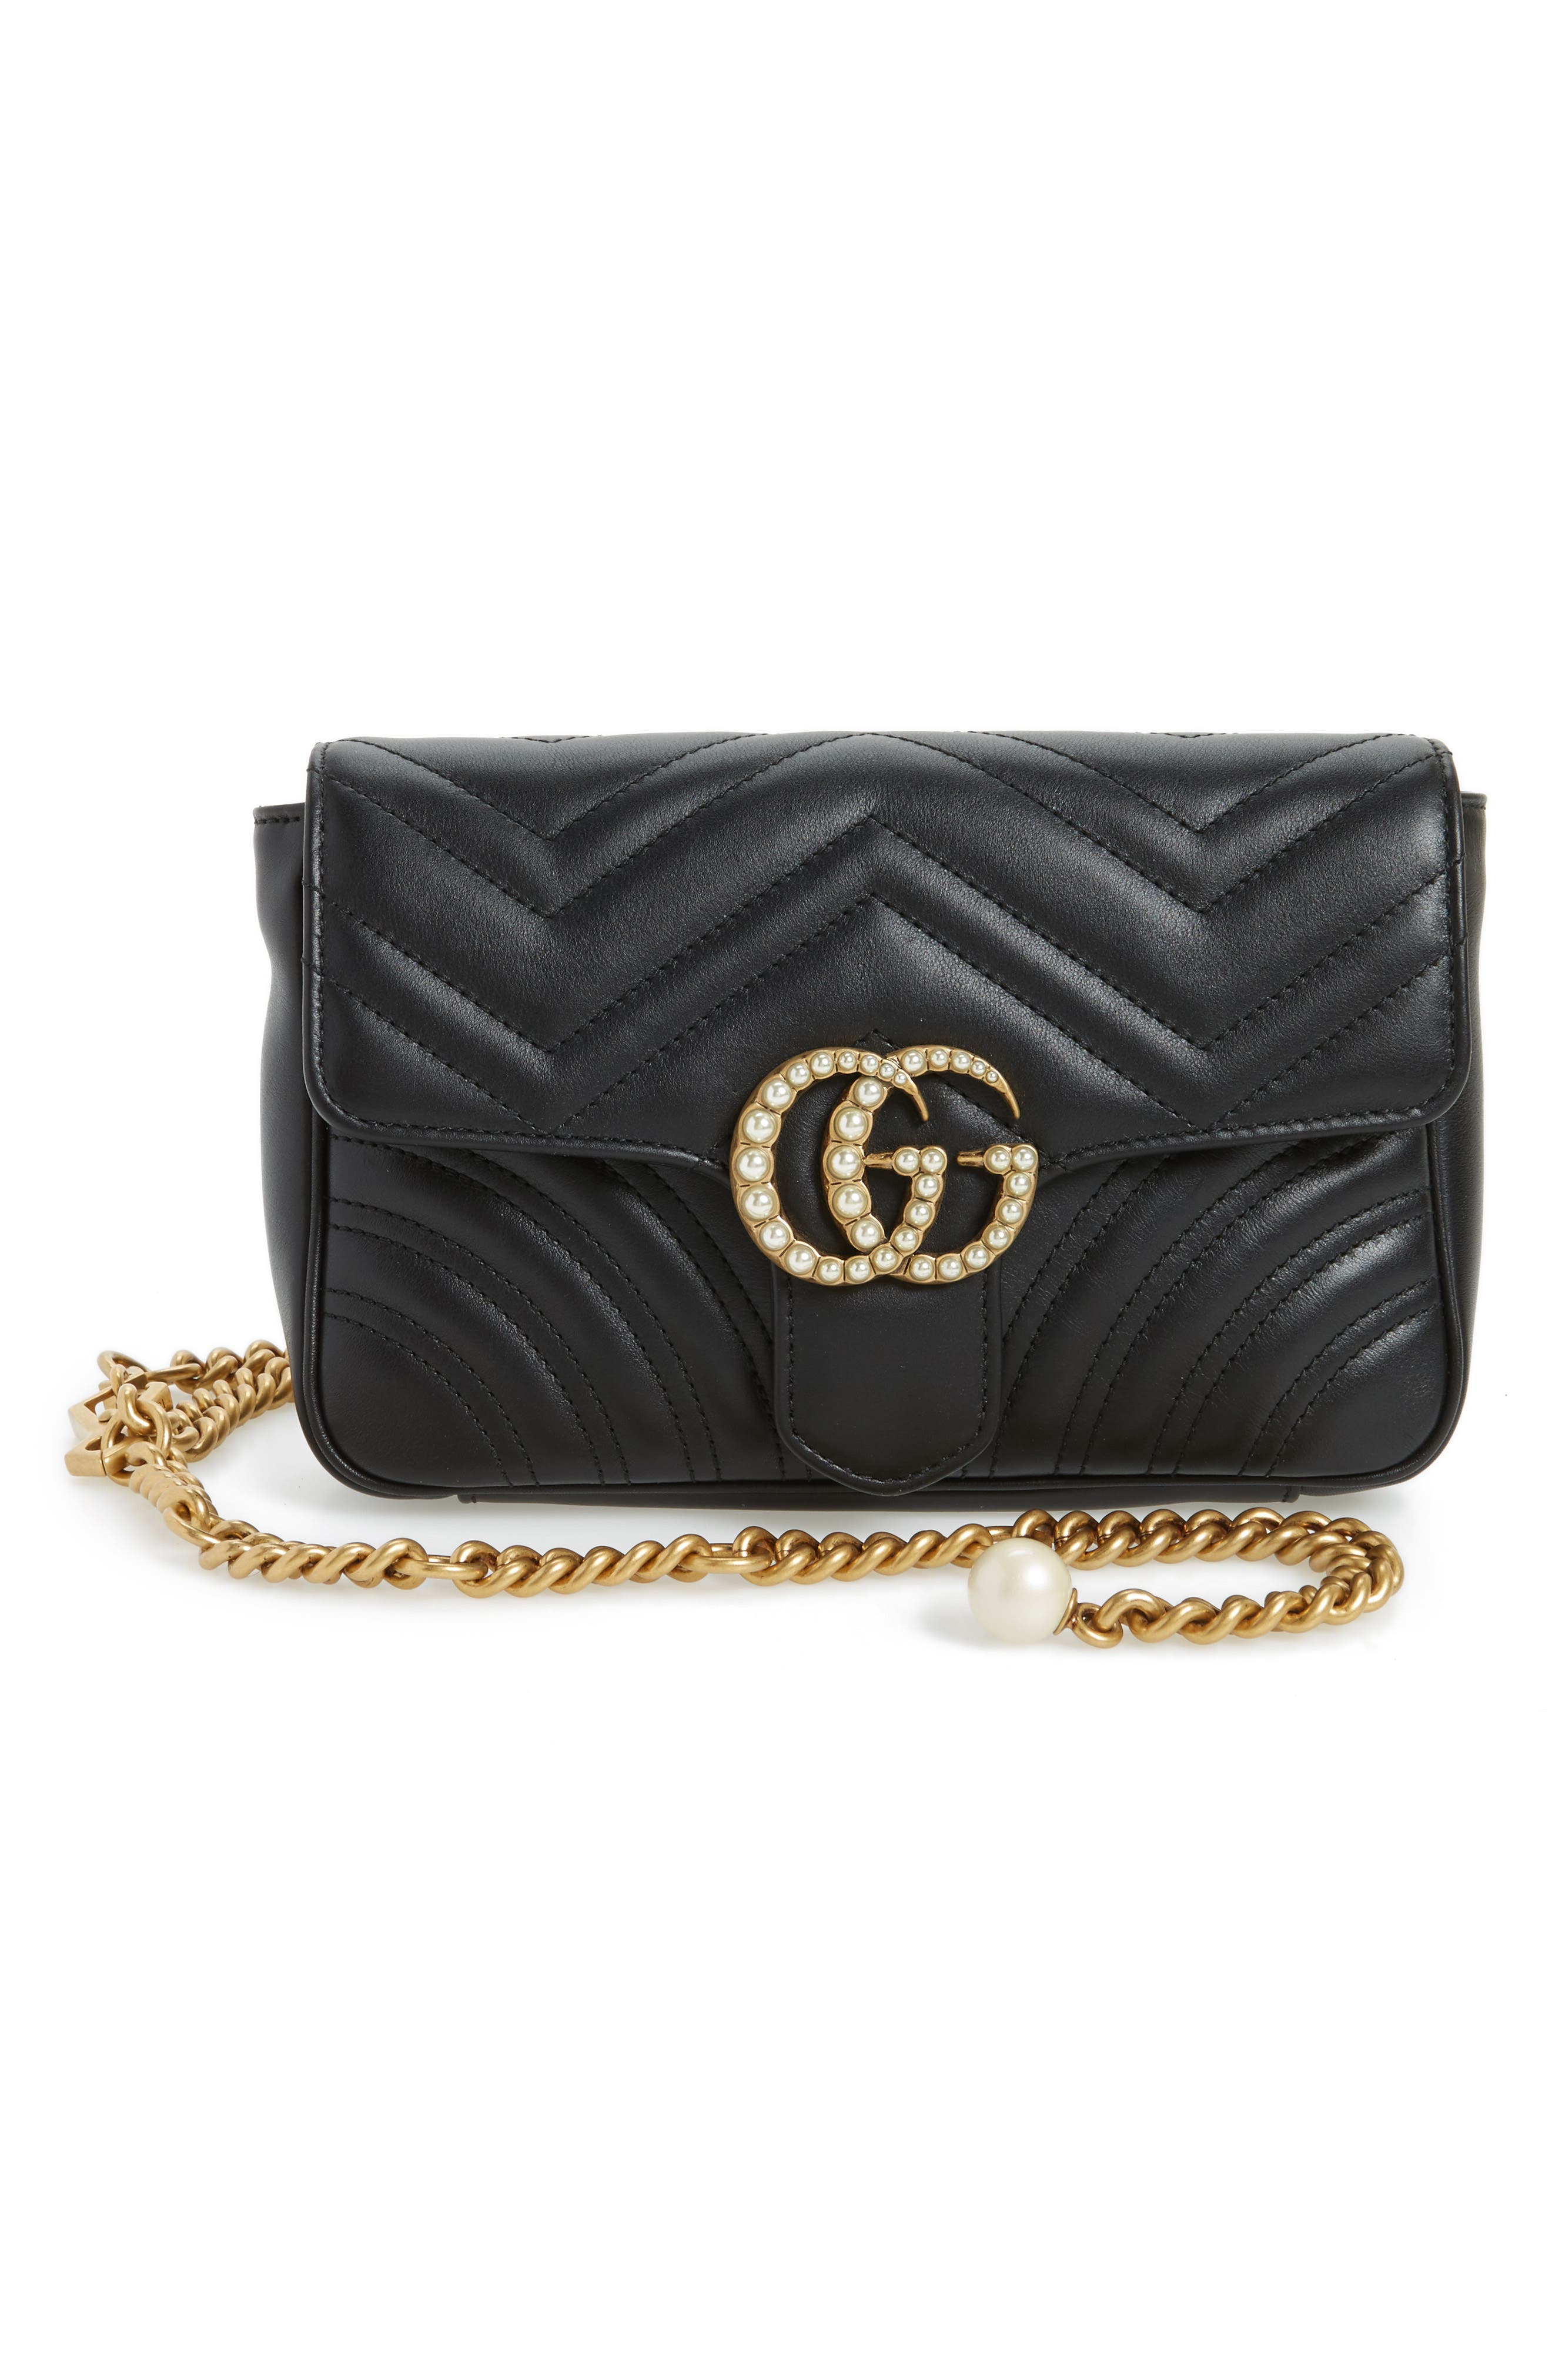 gucci belt bag with chain, OFF 77%,www 